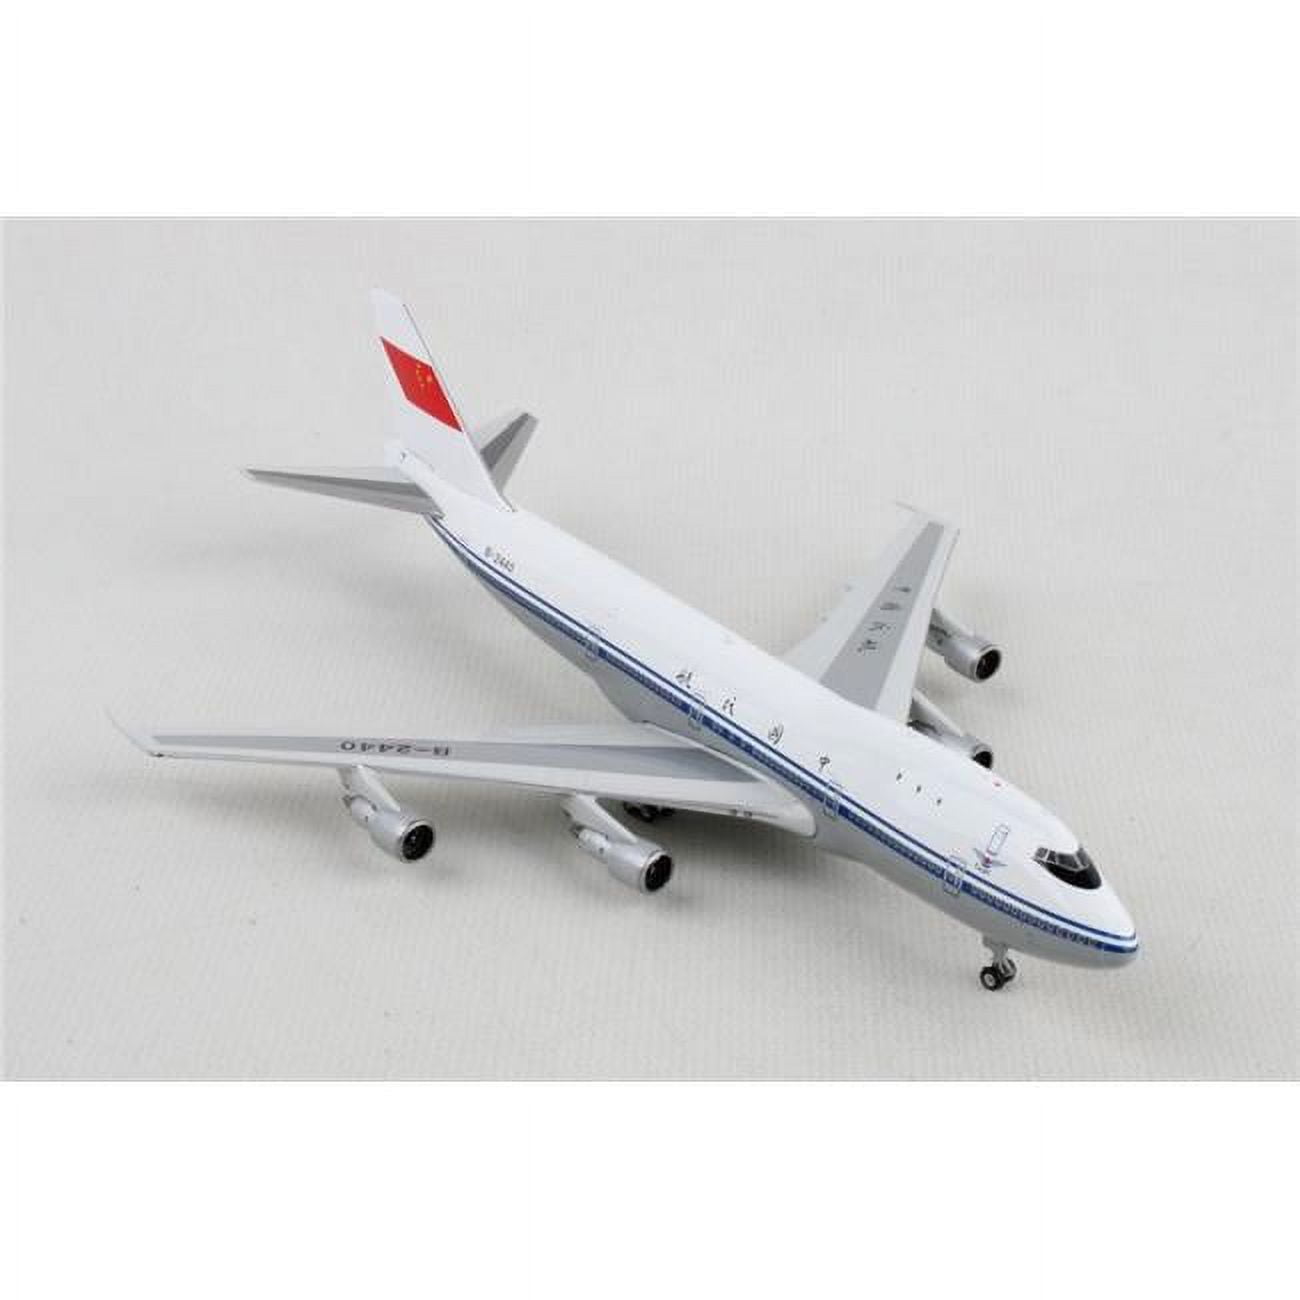 Picture of Phoenix PH2425 1-400 Scale Reg No. B-2440 Aircraft Model Plane for CAAC B747-200